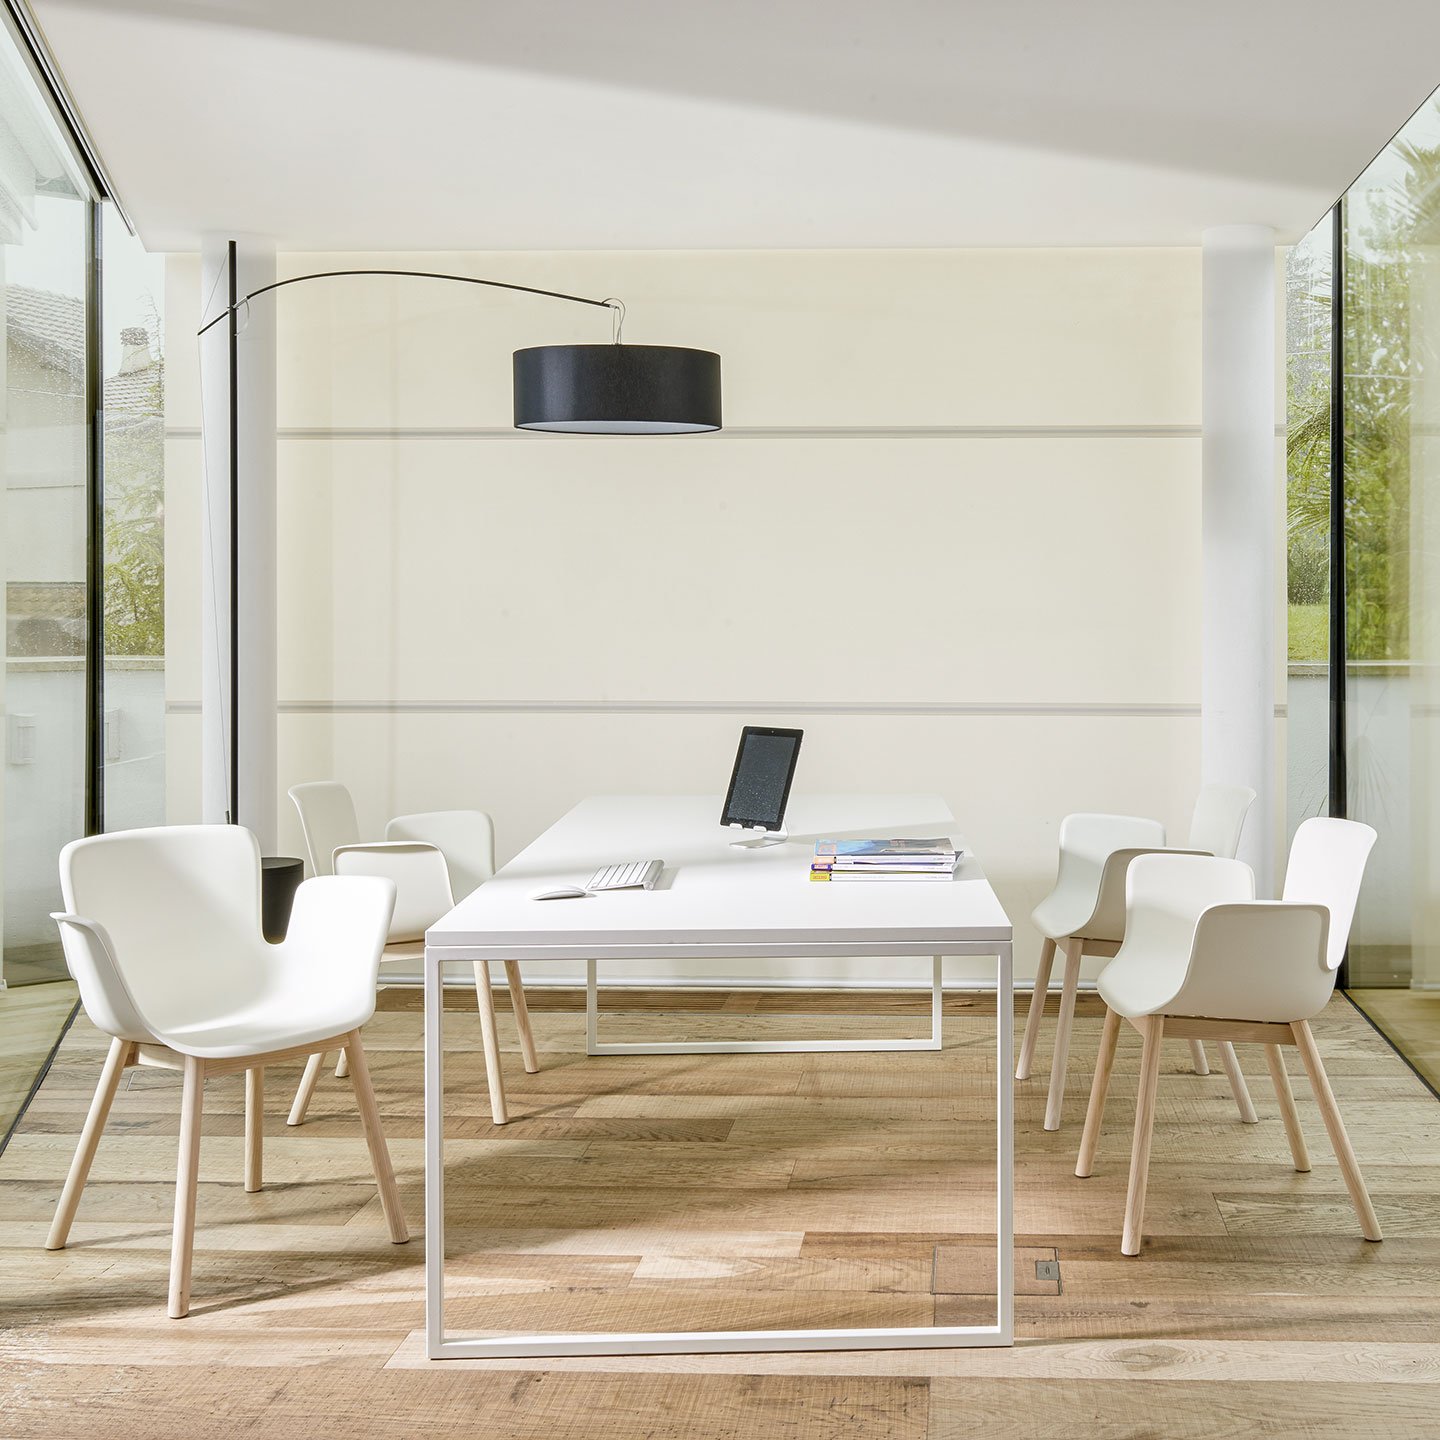 Haworth Fronzoni 64 table with 2 legs in matte white top finish in a closed meeting room surrounded by glass